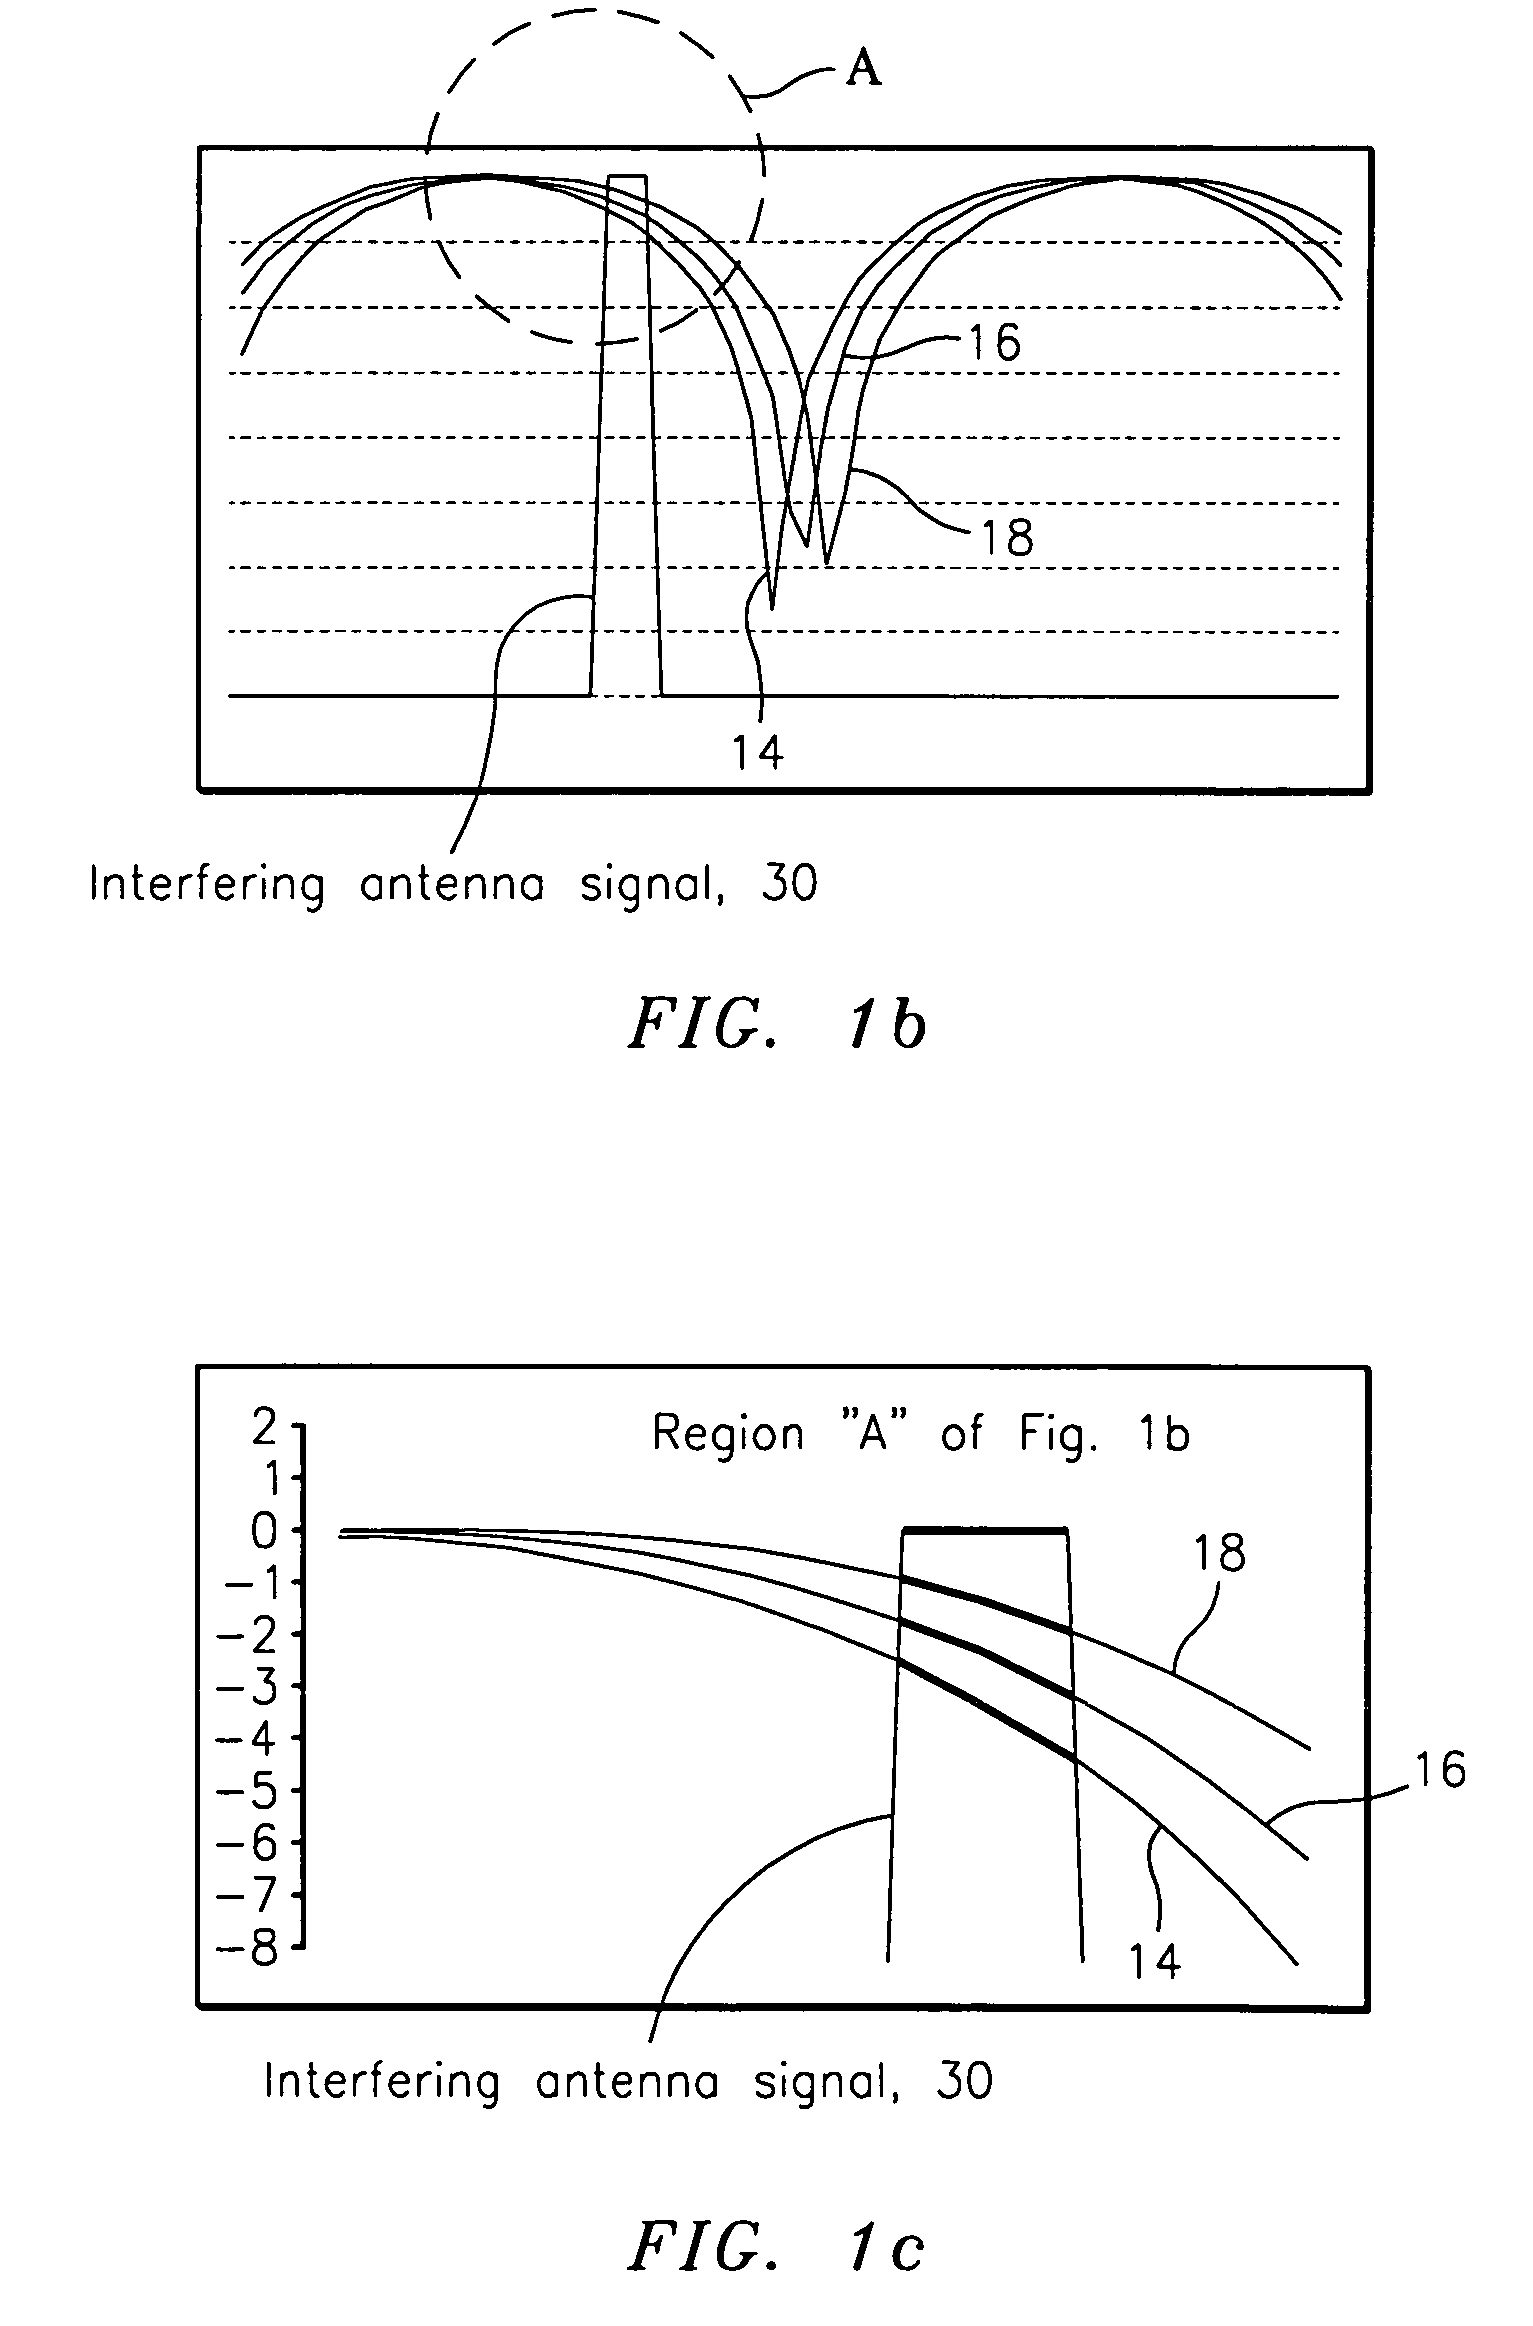 Tuning amplitude slope matched filter architecture